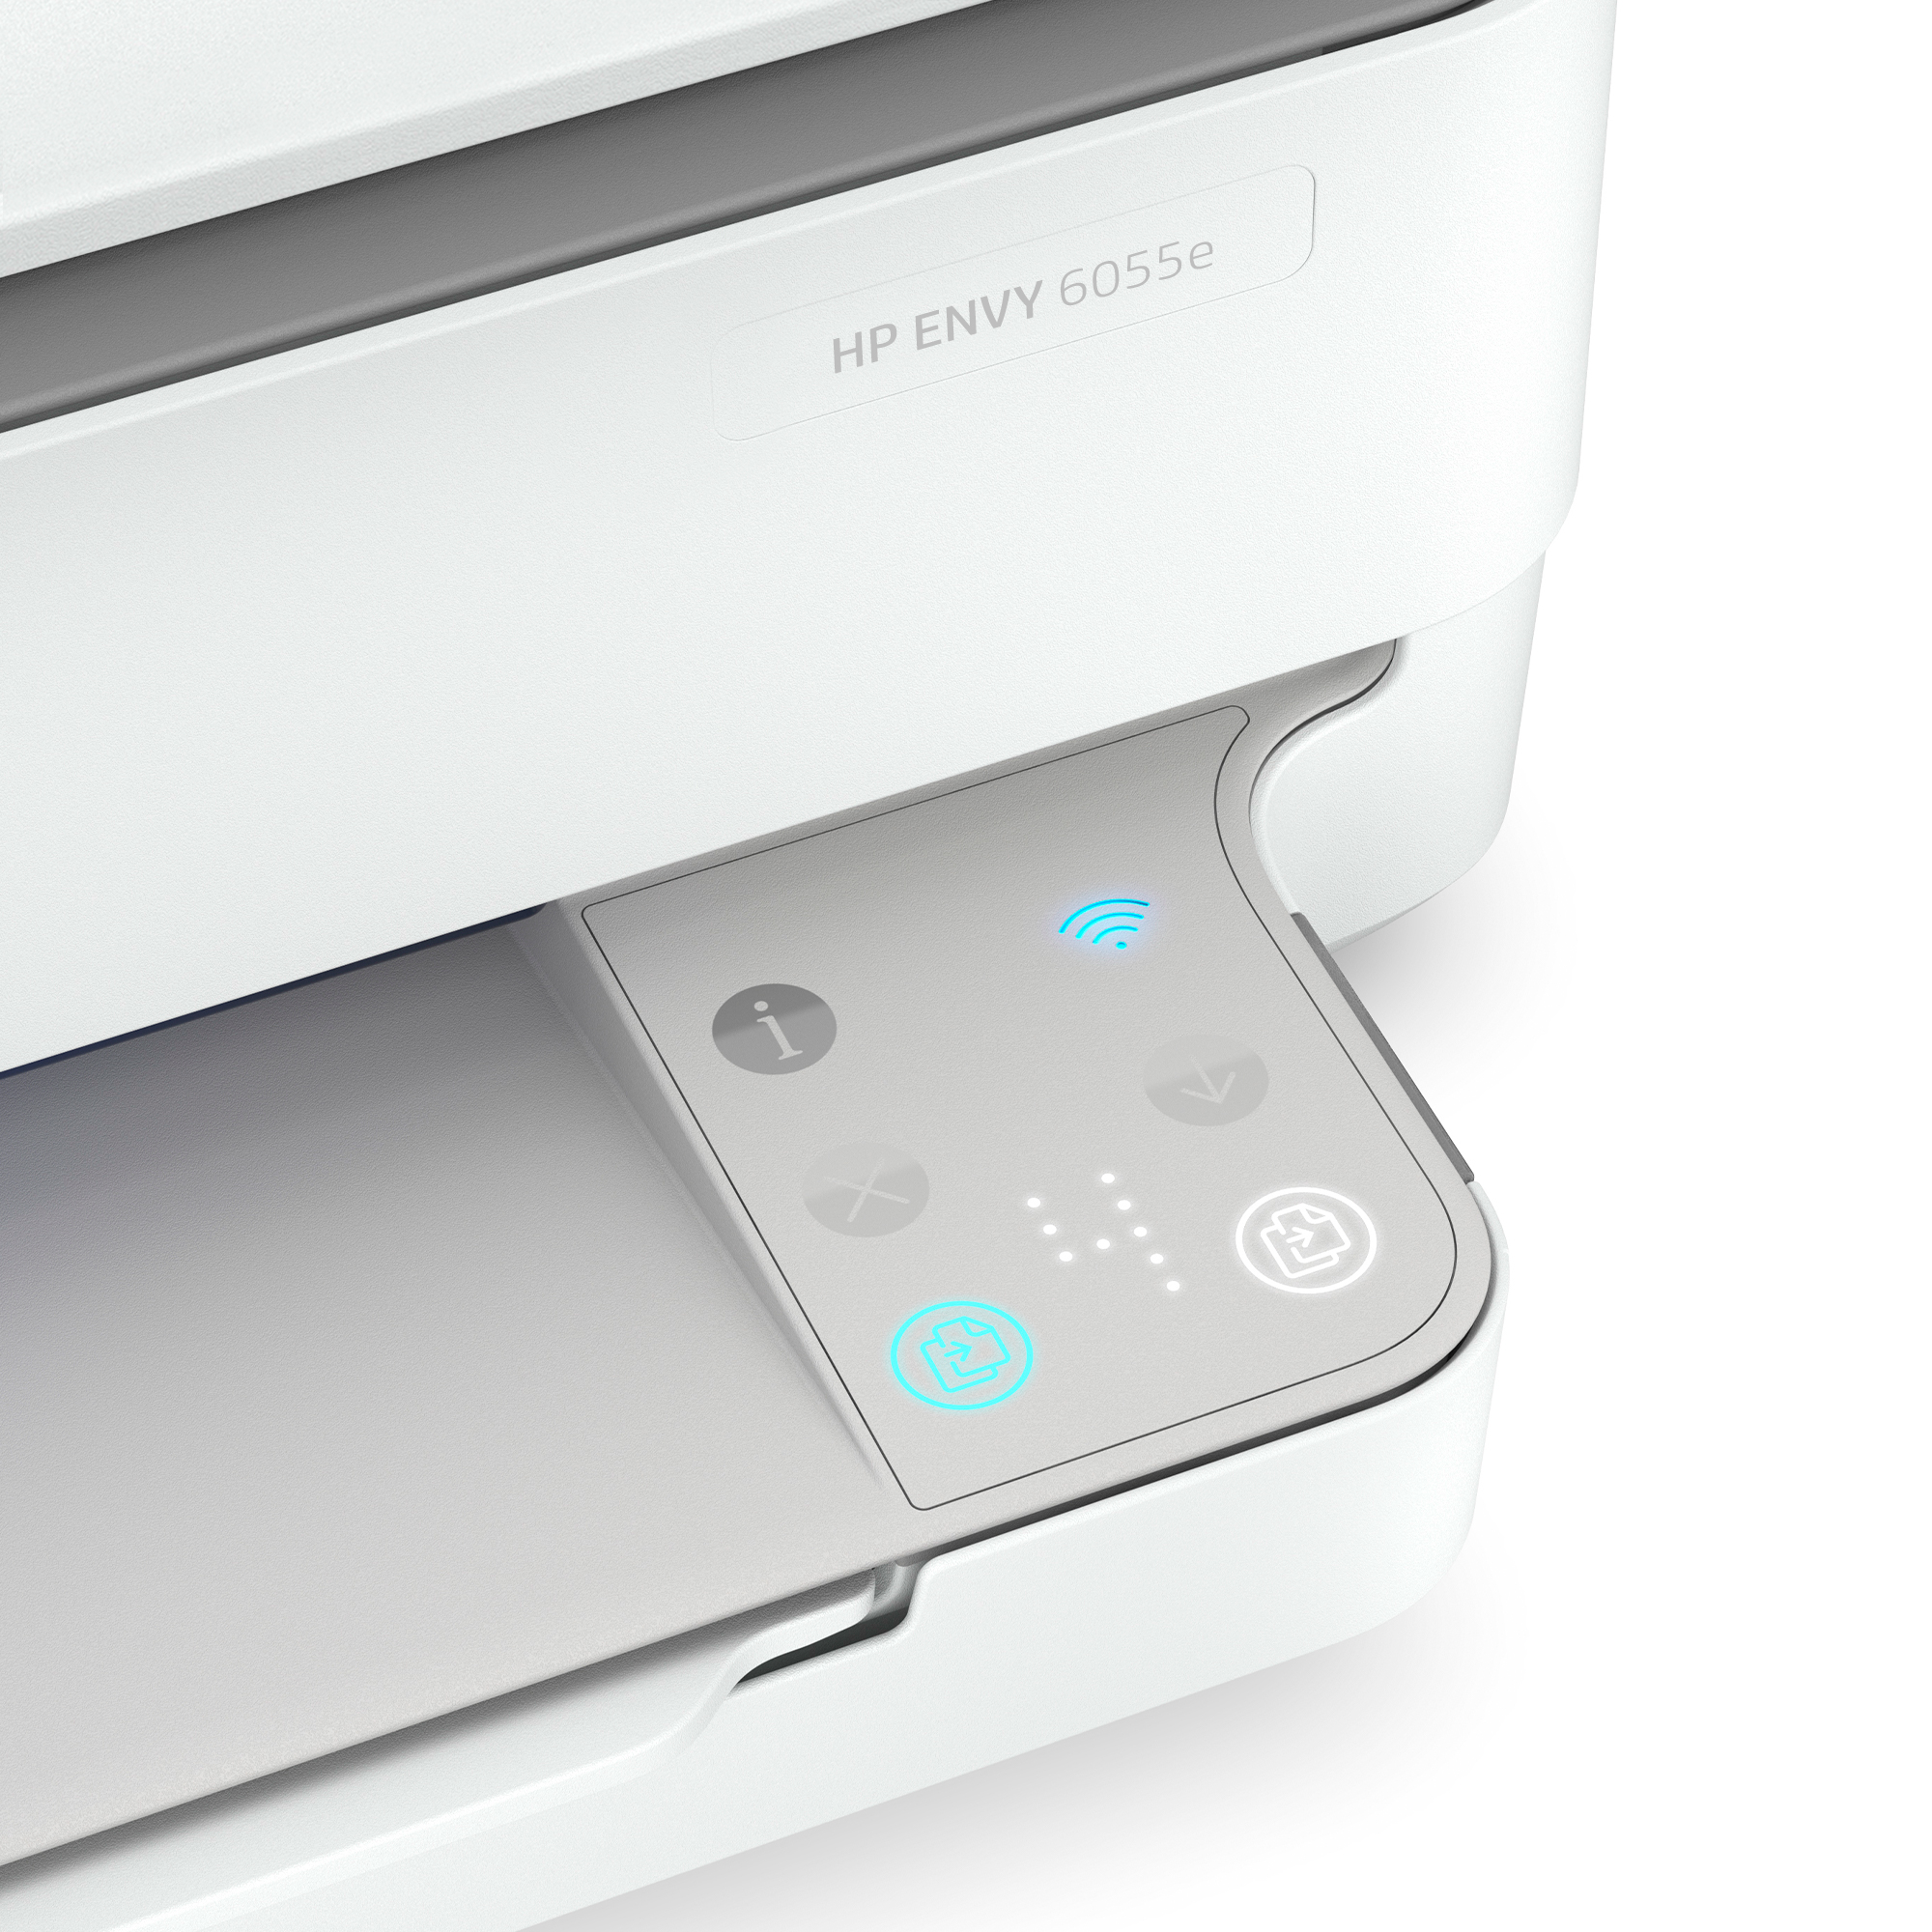 HP ENVY 6055e All-in-One Wireless Color Inkjet Printer -  3 Months Free Instant Ink with HP+ - image 7 of 19